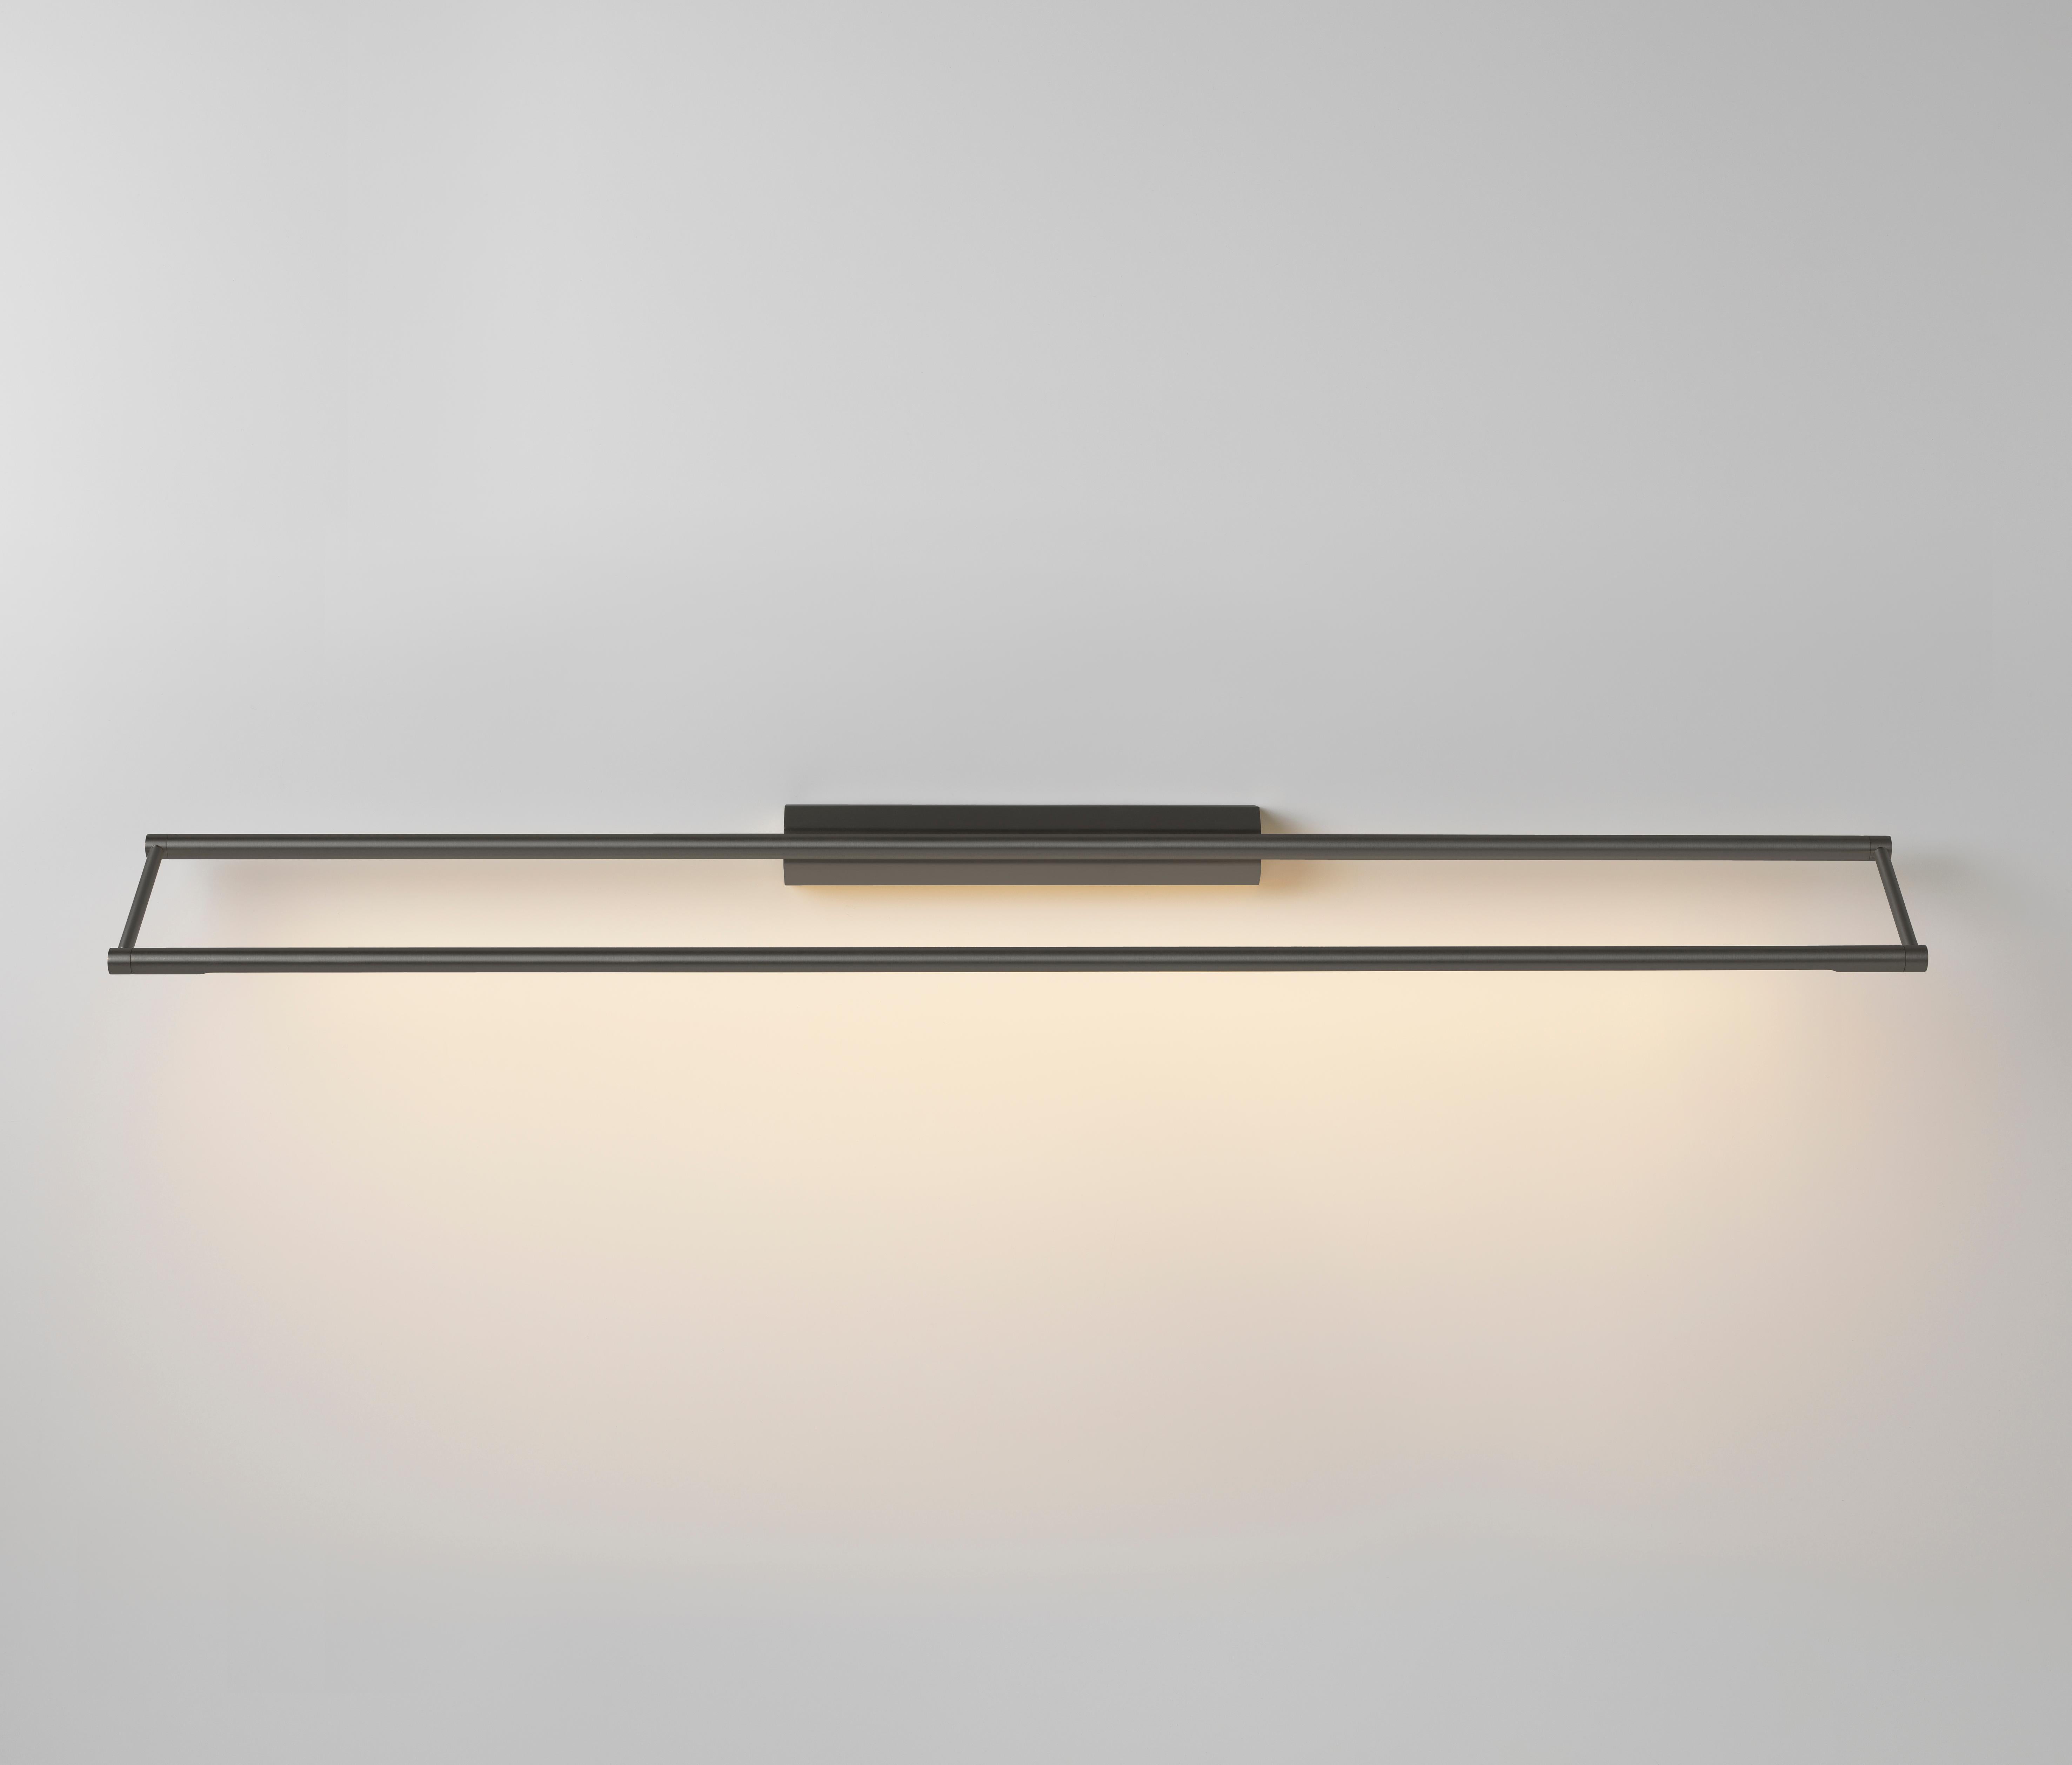 Link 985 Graphite wall light by Emilie Cathelineau
Dimensions: D 98.5 x W 11.5 x H 4.4 cm
Materials: Solid brass, Satin Polycarbonate diffuser, Black textile cable (2m)
Others finishes and dimensions are available.

All our lamps can be wired